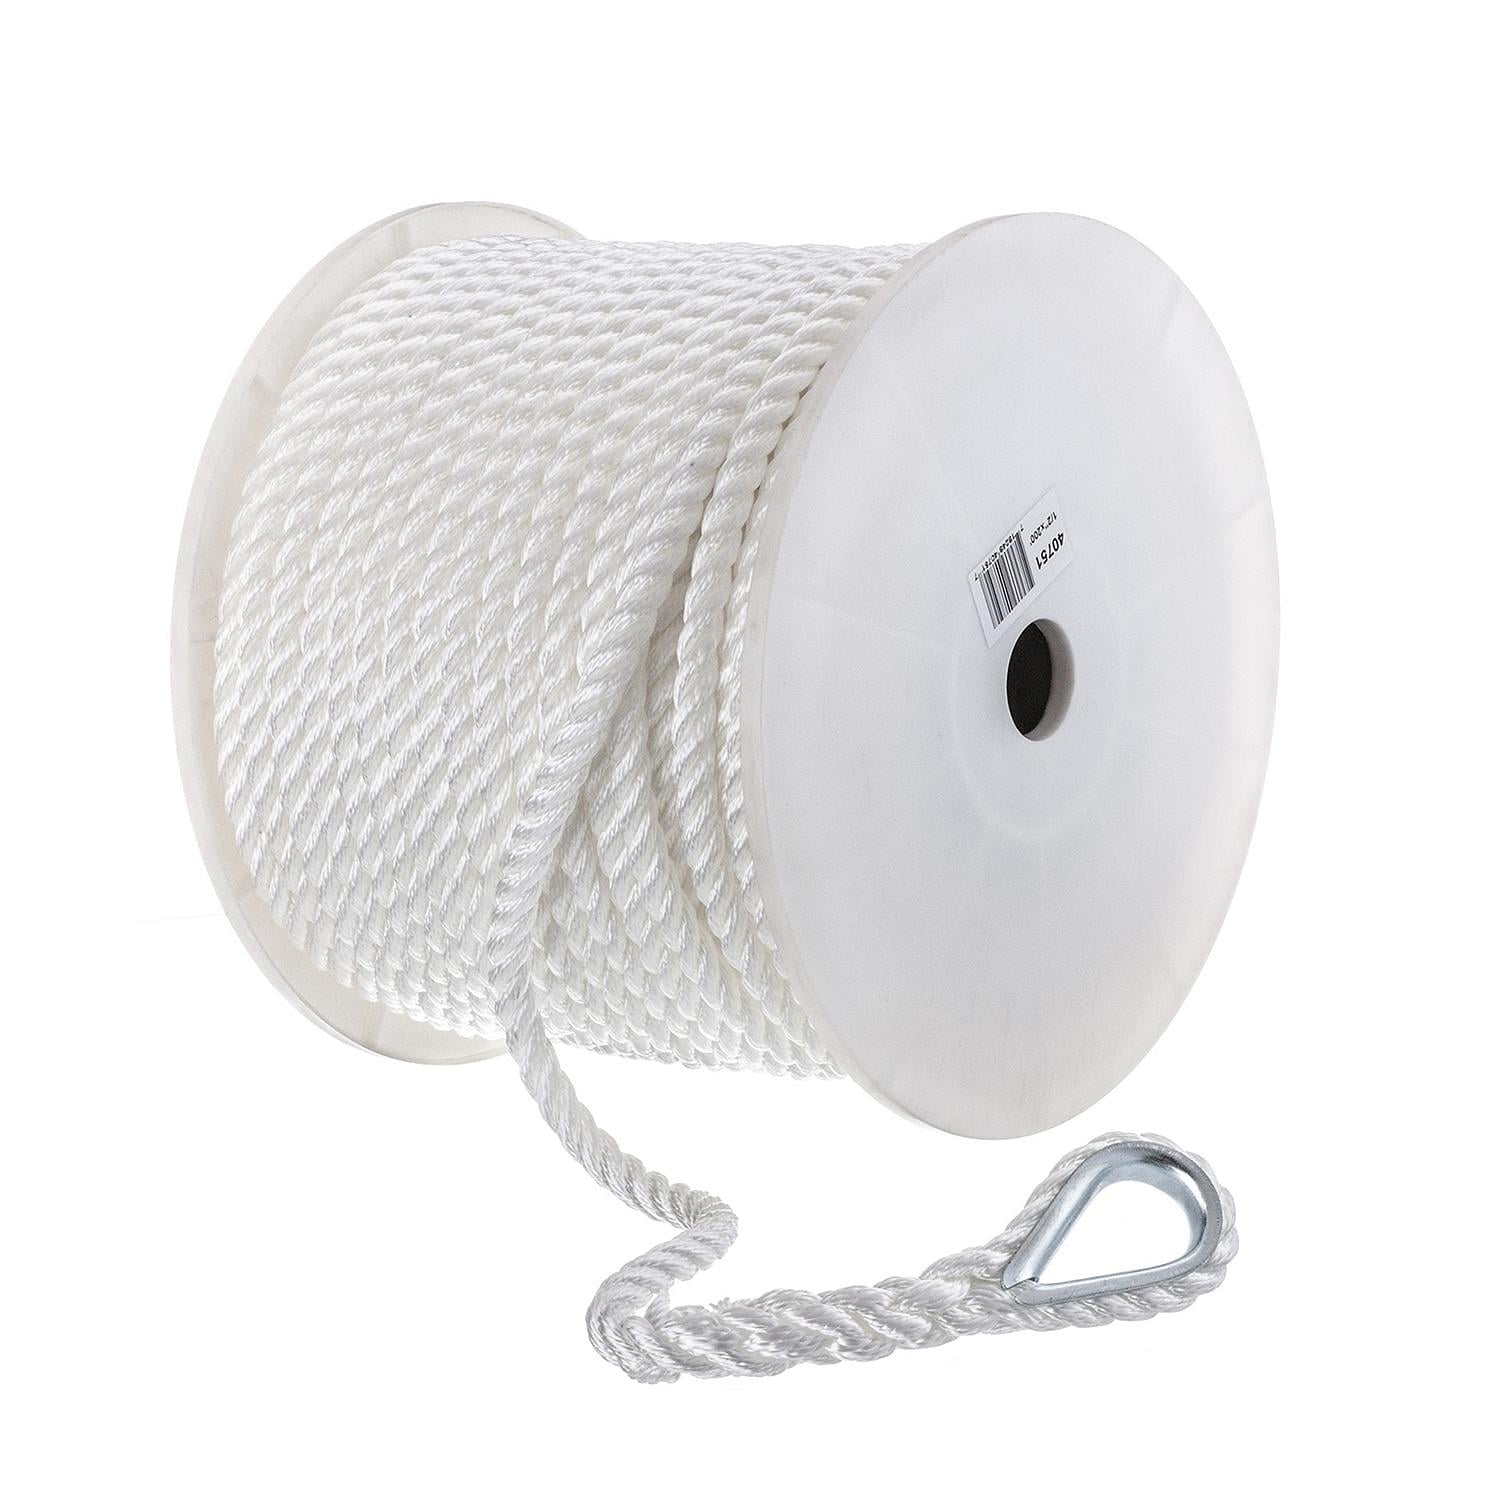 Seachoice Anchor Line Rope, 3-Strand Twisted, White, Nylon, 1/2 In